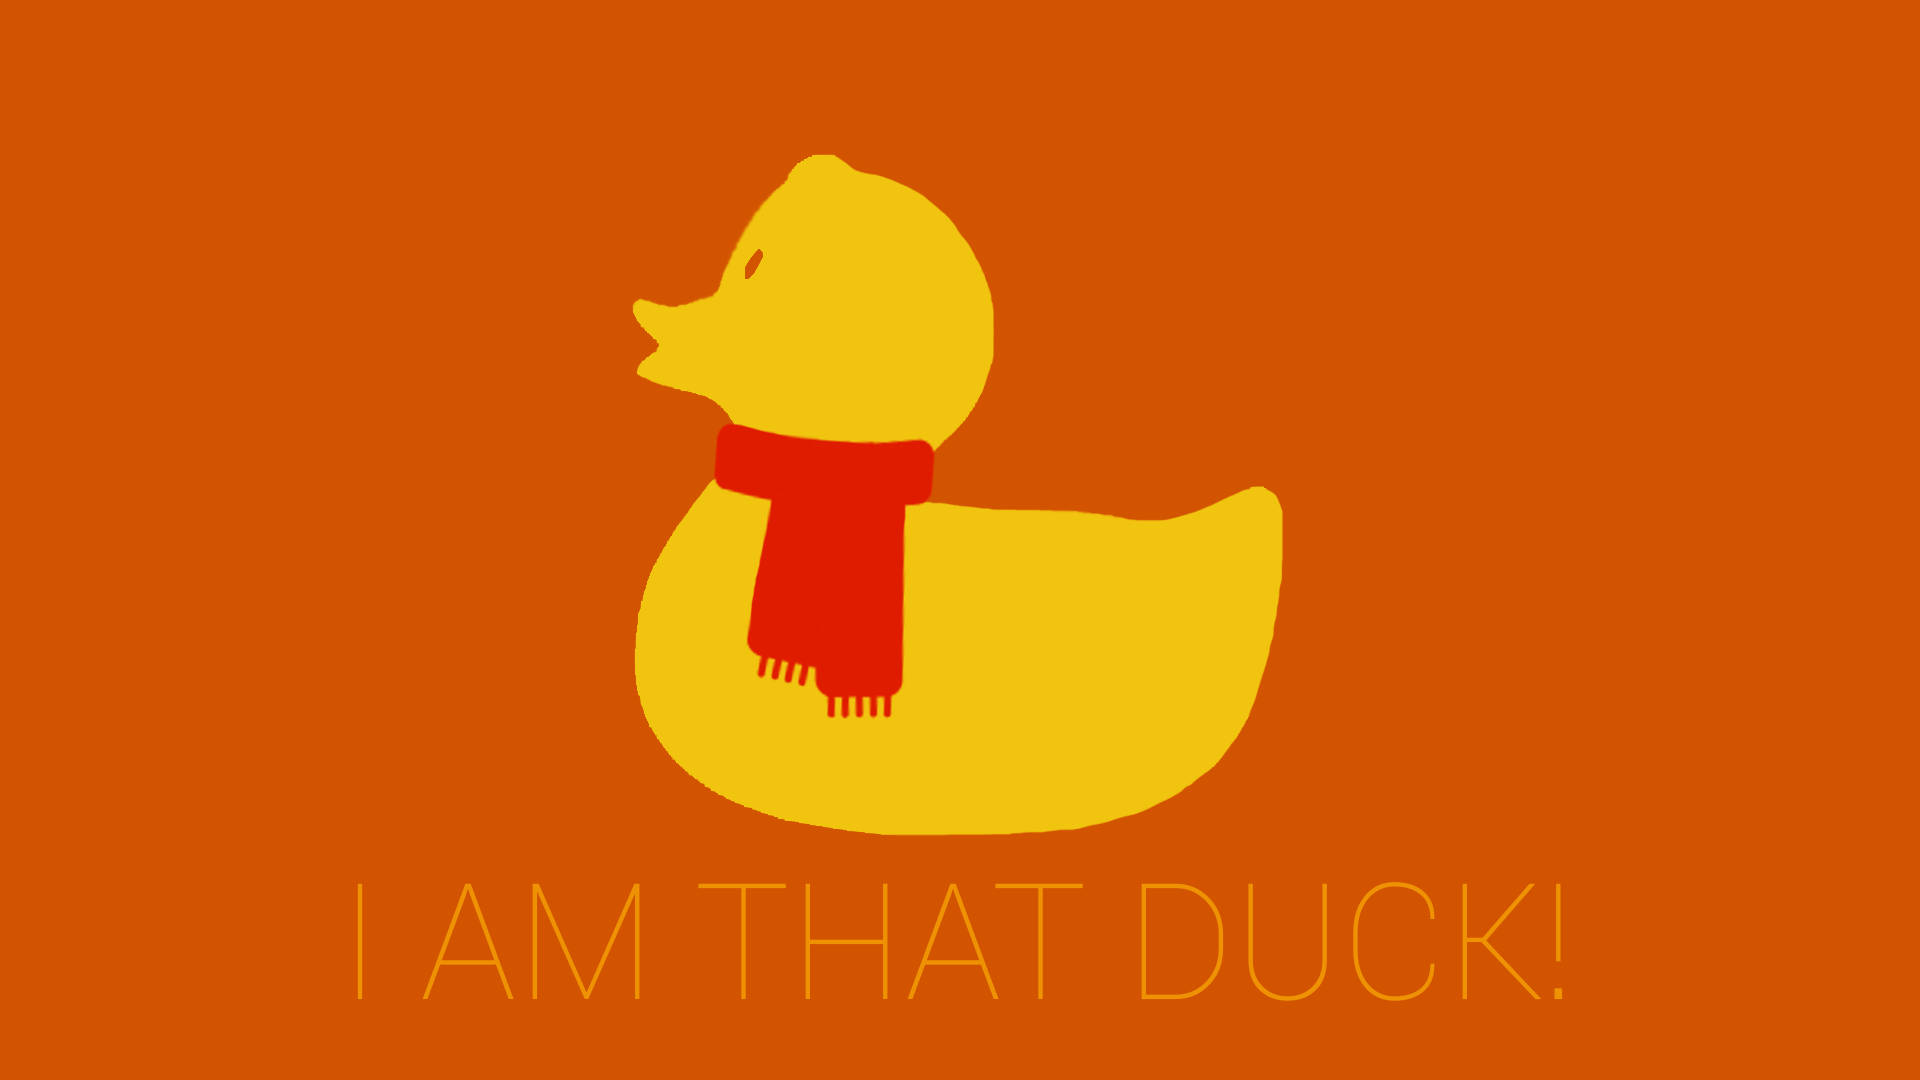 I Am That Duck